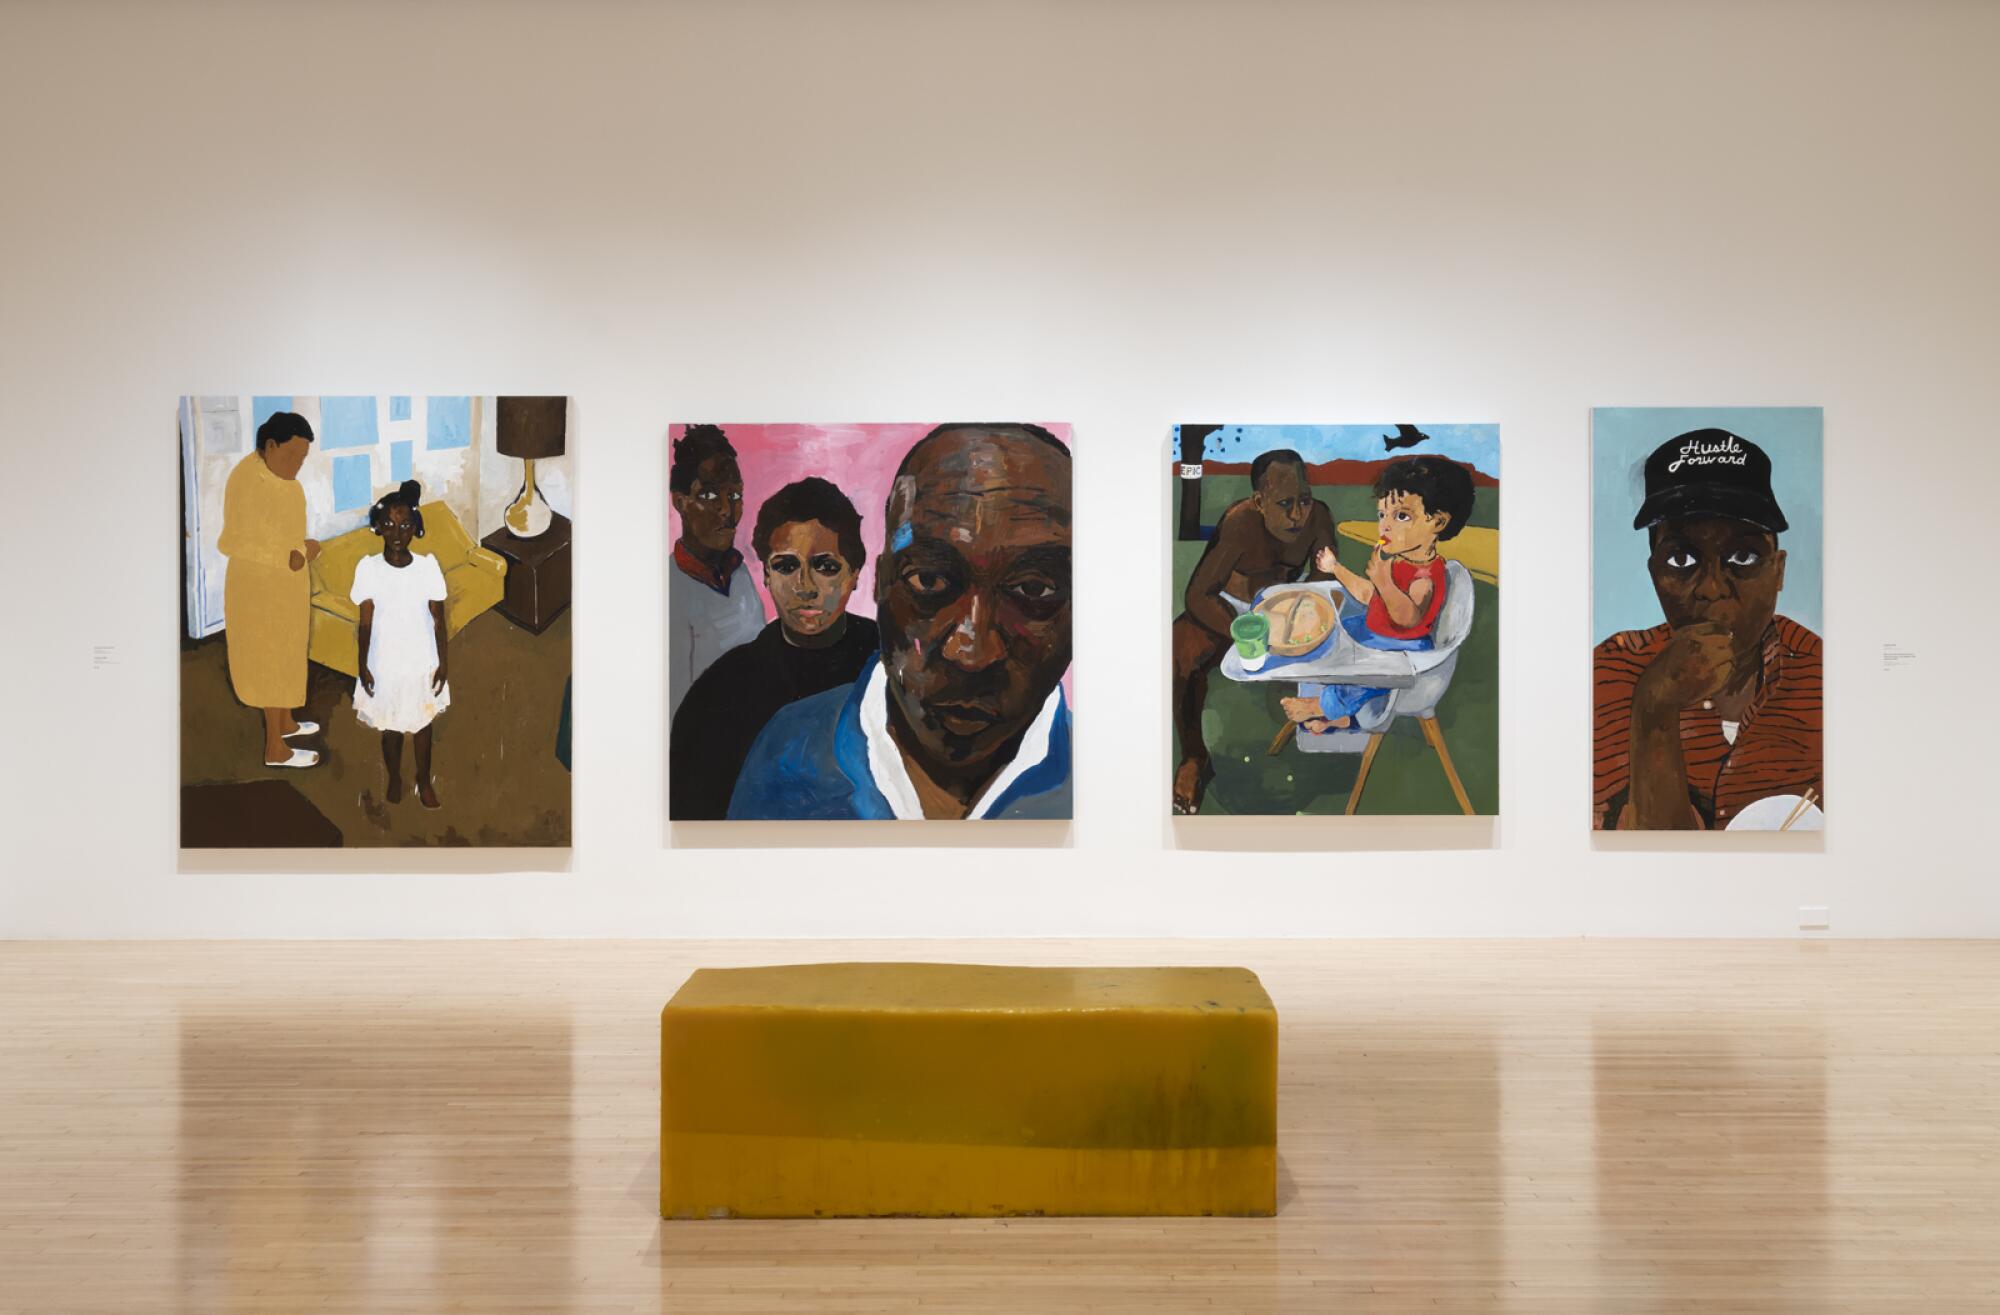 A gallery features four paintings by Henry Taylor depicting the artist and family members, as well as a bright yellow bench.